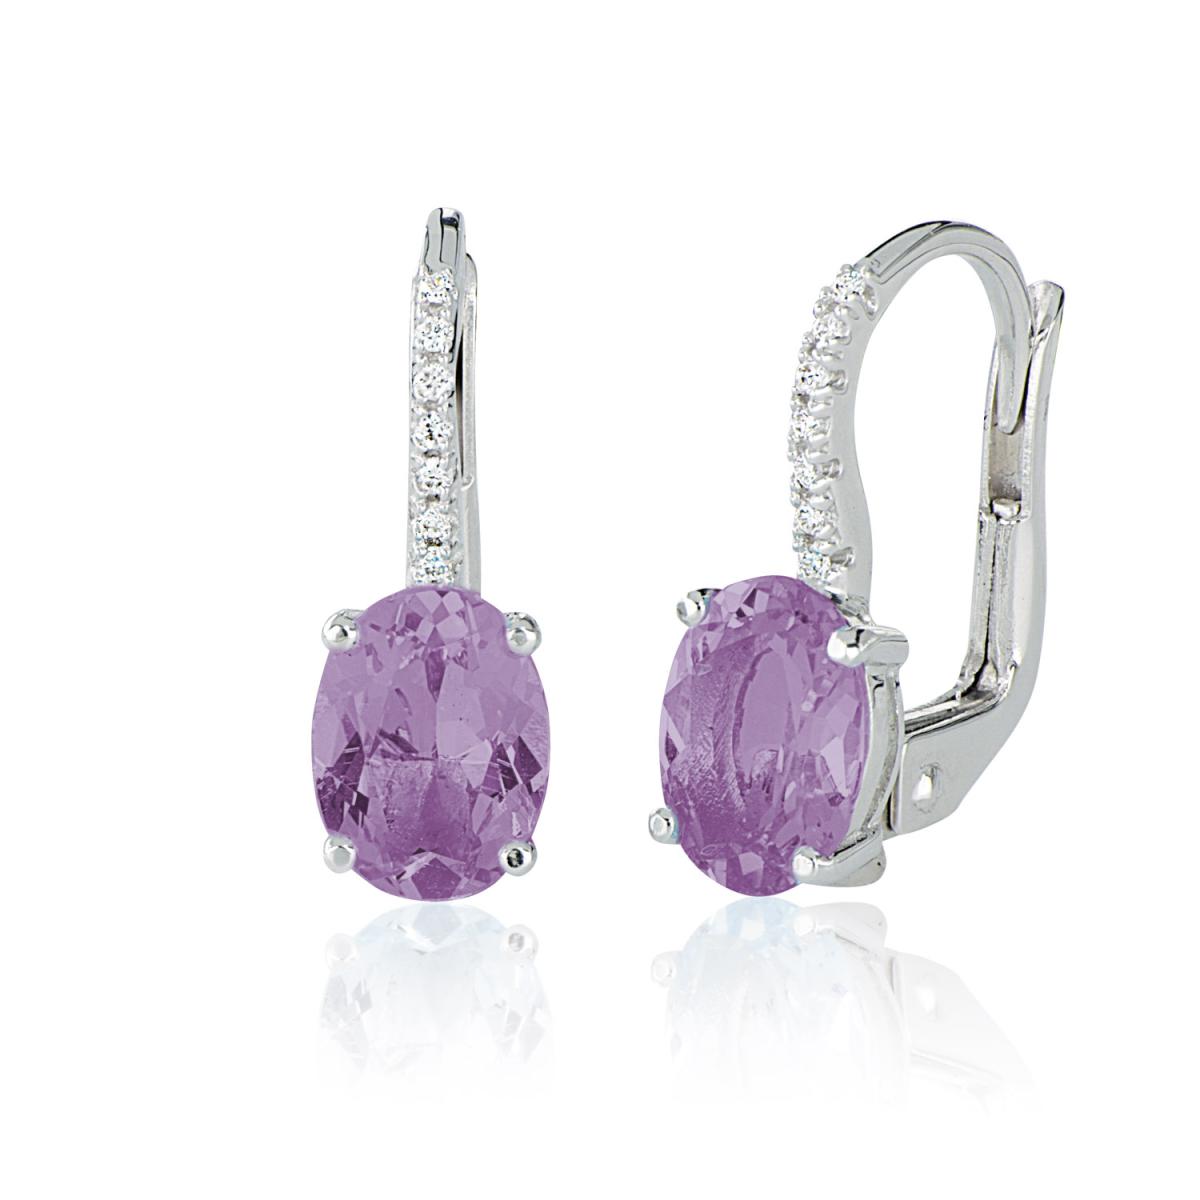 18 kt white gold earrings, with diamonds and central semiprecious stone - OD465/